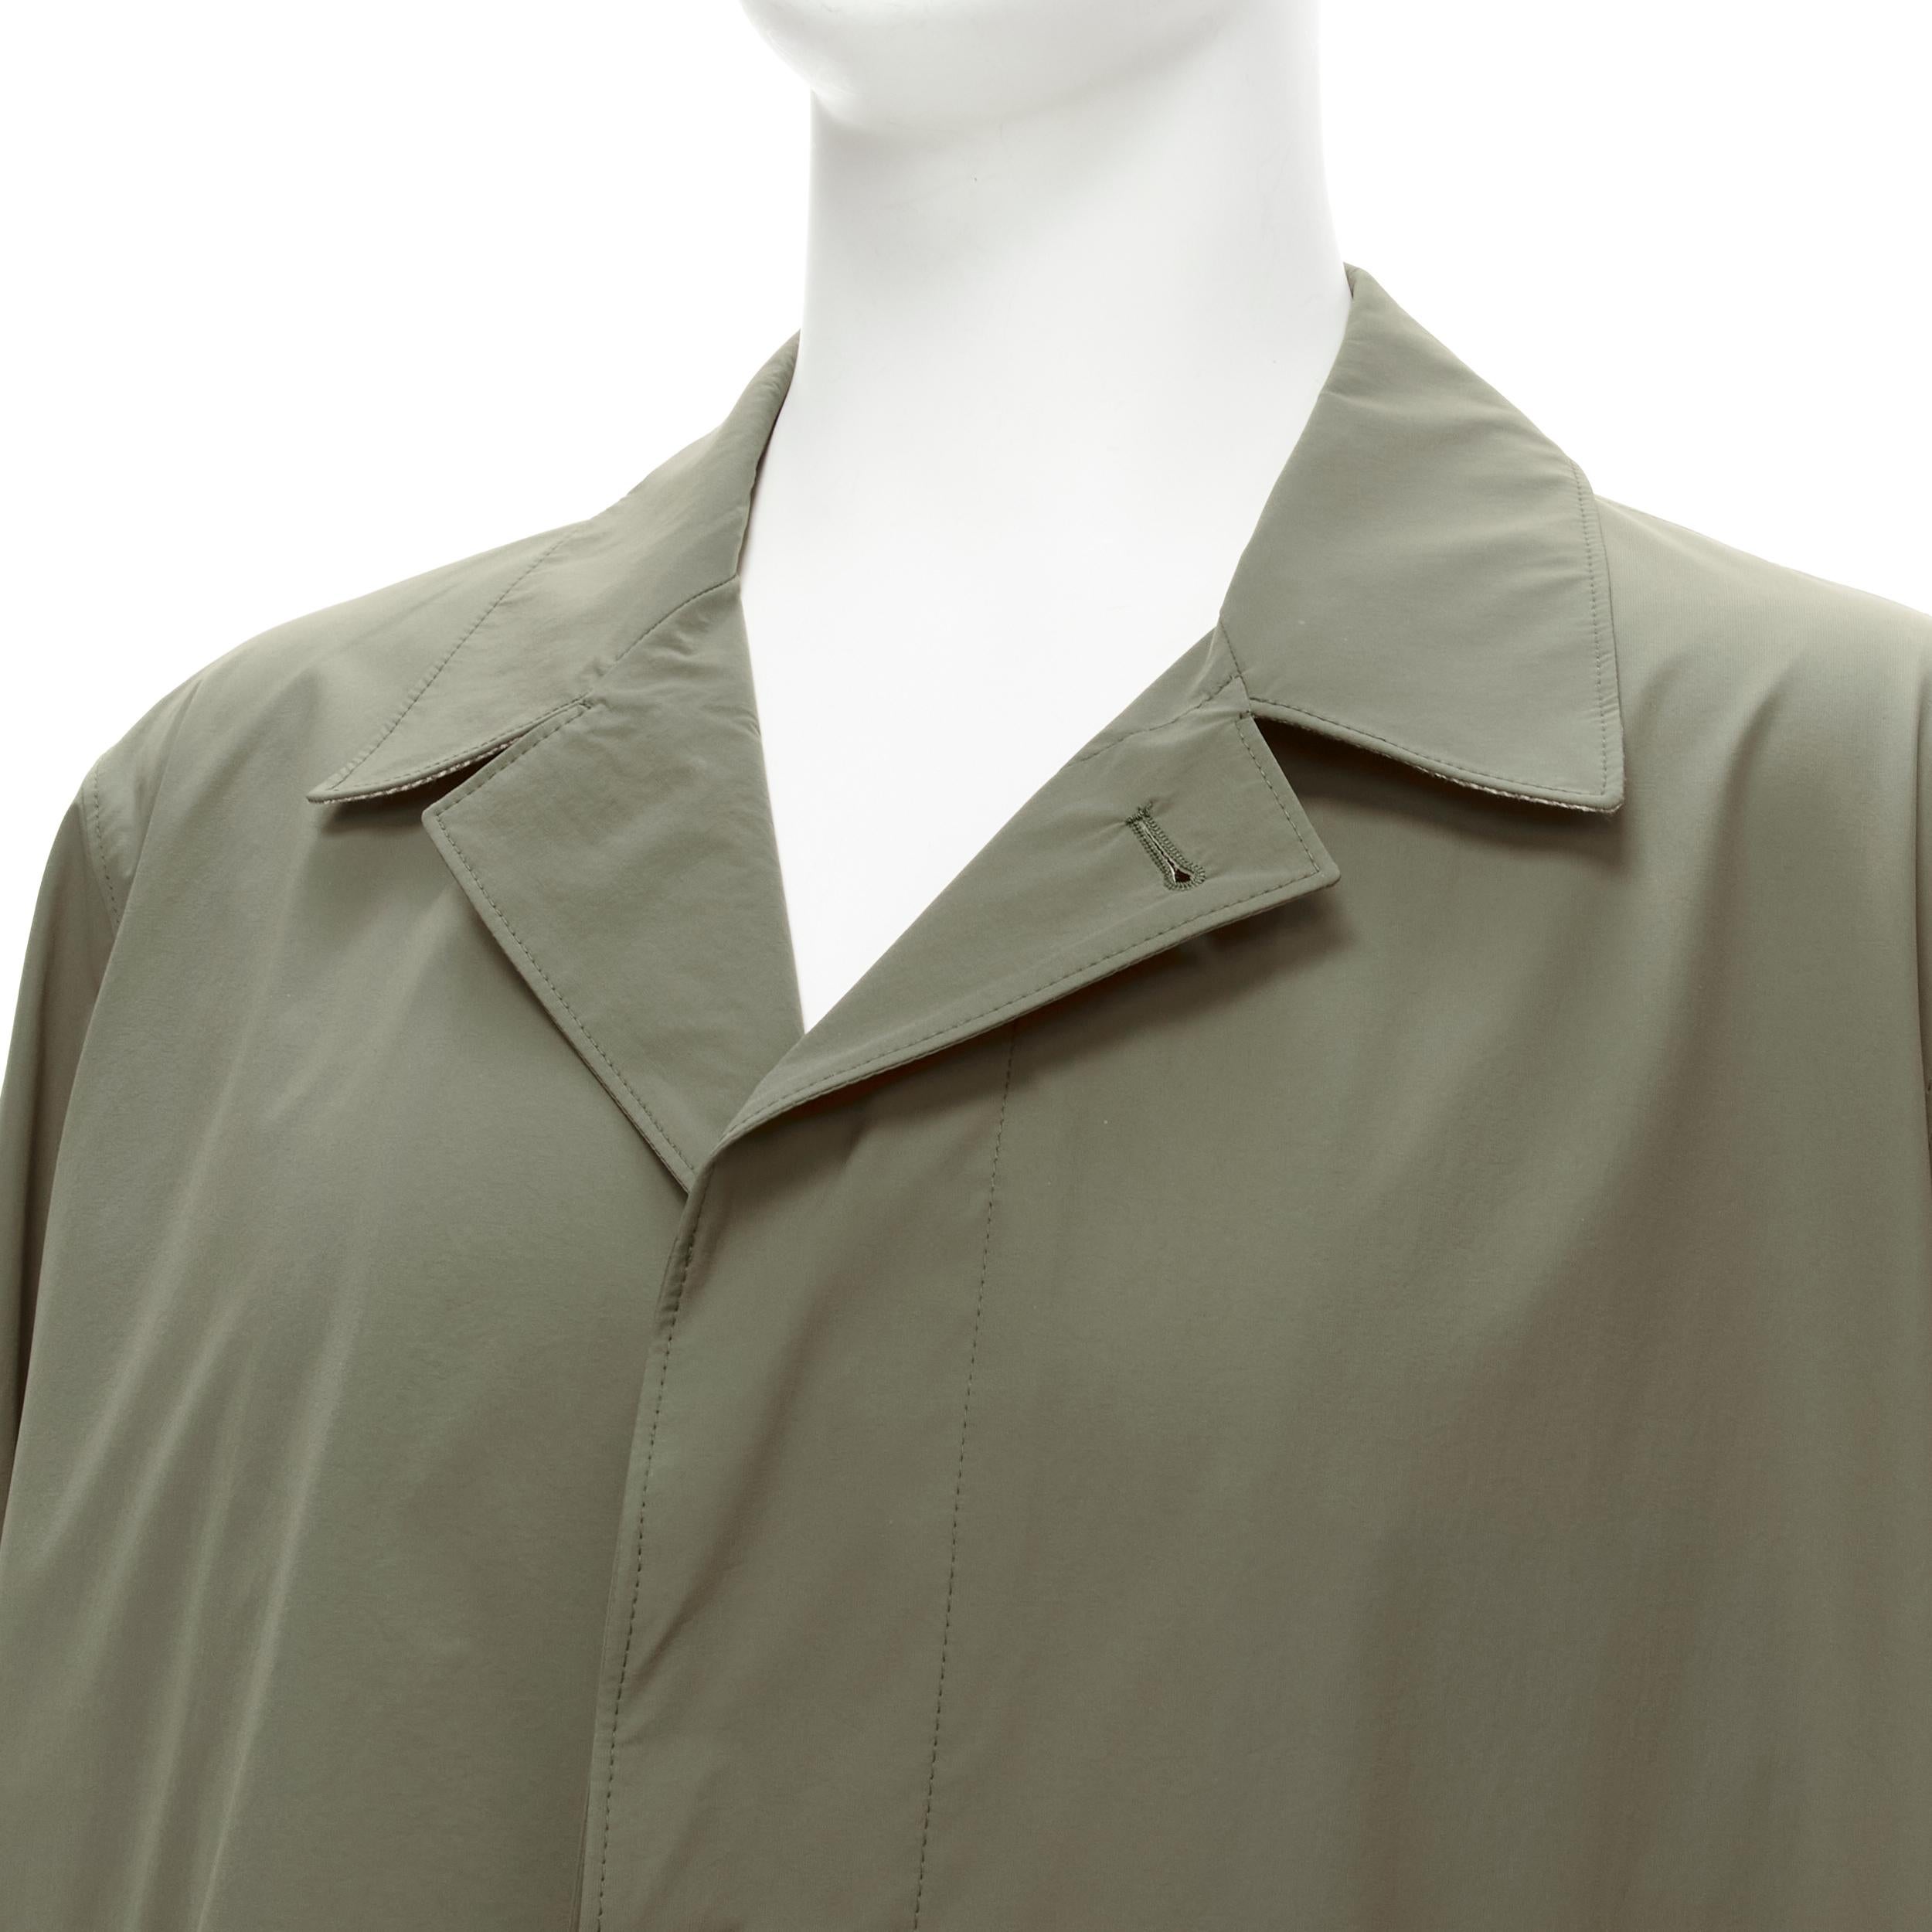 LORO PIANA green classic minimal invisible buttons longline jacket coat XL
Reference: TGAS/D00290
Brand: Loro Piana
Material: Polyamide, Blend
Color: Khaki
Pattern: Solid
Closure: Button
Lining: Green Fabric
Extra Details: Invisible button details.